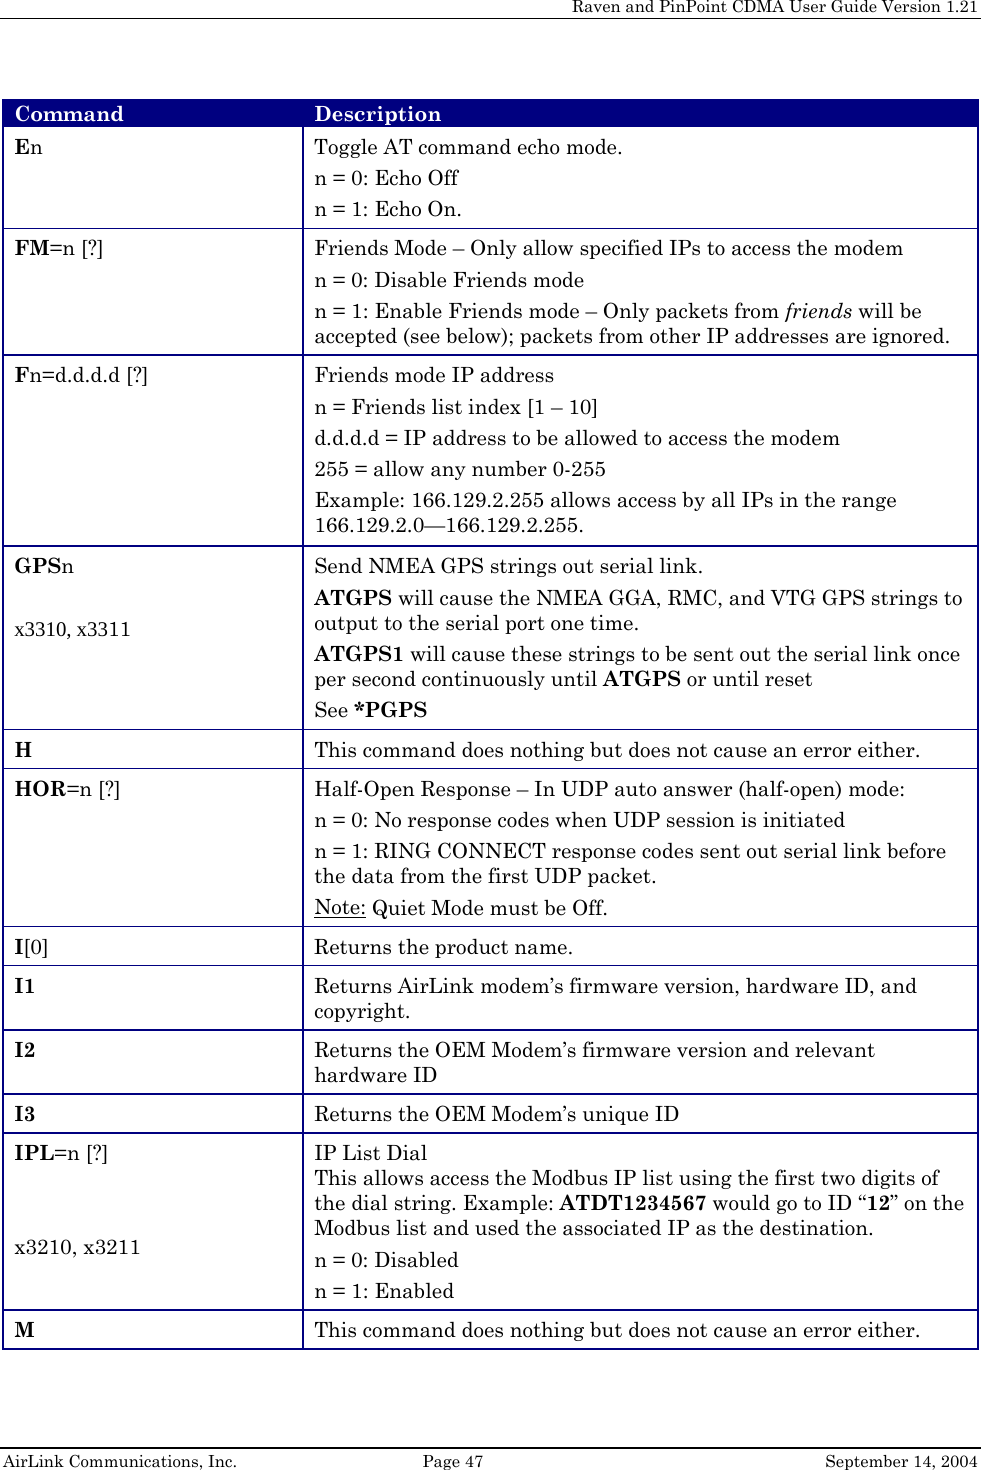     Raven and PinPoint CDMA User Guide Version 1.21  AirLink Communications, Inc.  Page 47  September 14, 2004 Command  Description En  Toggle AT command echo mode. n = 0: Echo Off n = 1: Echo On. FM=n [?]  Friends Mode – Only allow specified IPs to access the modem n = 0: Disable Friends mode n = 1: Enable Friends mode – Only packets from friends will be accepted (see below); packets from other IP addresses are ignored. Fn=d.d.d.d [?]  Friends mode IP address n = Friends list index [1 – 10] d.d.d.d = IP address to be allowed to access the modem 255 = allow any number 0-255 Example: 166.129.2.255 allows access by all IPs in the range 166.129.2.0—166.129.2.255. GPSn  x3310, x3311 Send NMEA GPS strings out serial link. ATGPS will cause the NMEA GGA, RMC, and VTG GPS strings to output to the serial port one time. ATGPS1 will cause these strings to be sent out the serial link once per second continuously until ATGPS or until reset See *PGPS H  This command does nothing but does not cause an error either. HOR=n [?]  Half-Open Response – In UDP auto answer (half-open) mode: n = 0: No response codes when UDP session is initiated n = 1: RING CONNECT response codes sent out serial link before the data from the first UDP packet. Note: Quiet Mode must be Off. I[0]  Returns the product name. I1  Returns AirLink modem’s firmware version, hardware ID, and copyright. I2  Returns the OEM Modem’s firmware version and relevant hardware ID I3  Returns the OEM Modem’s unique ID IPL=n [?]   x3210, x3211 IP List Dial This allows access the Modbus IP list using the first two digits of the dial string. Example: ATDT1234567 would go to ID “12” on the Modbus list and used the associated IP as the destination. n = 0: Disabled n = 1: Enabled M  This command does nothing but does not cause an error either. 